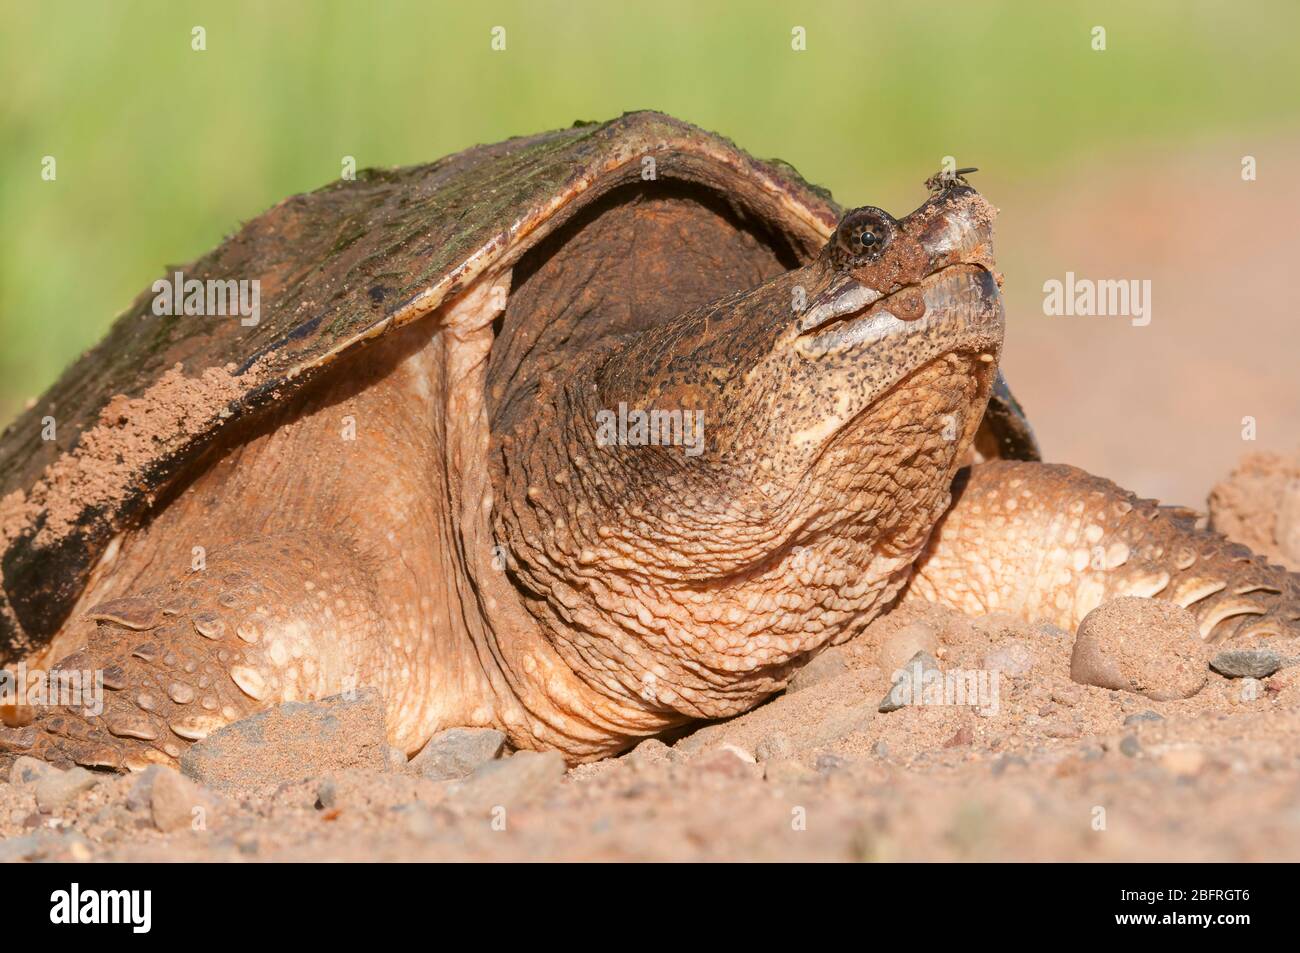 Common Snapping Turtle, Eastern North America, by Dominique Braud/Dembinsky Photo Assoc Stock Photo